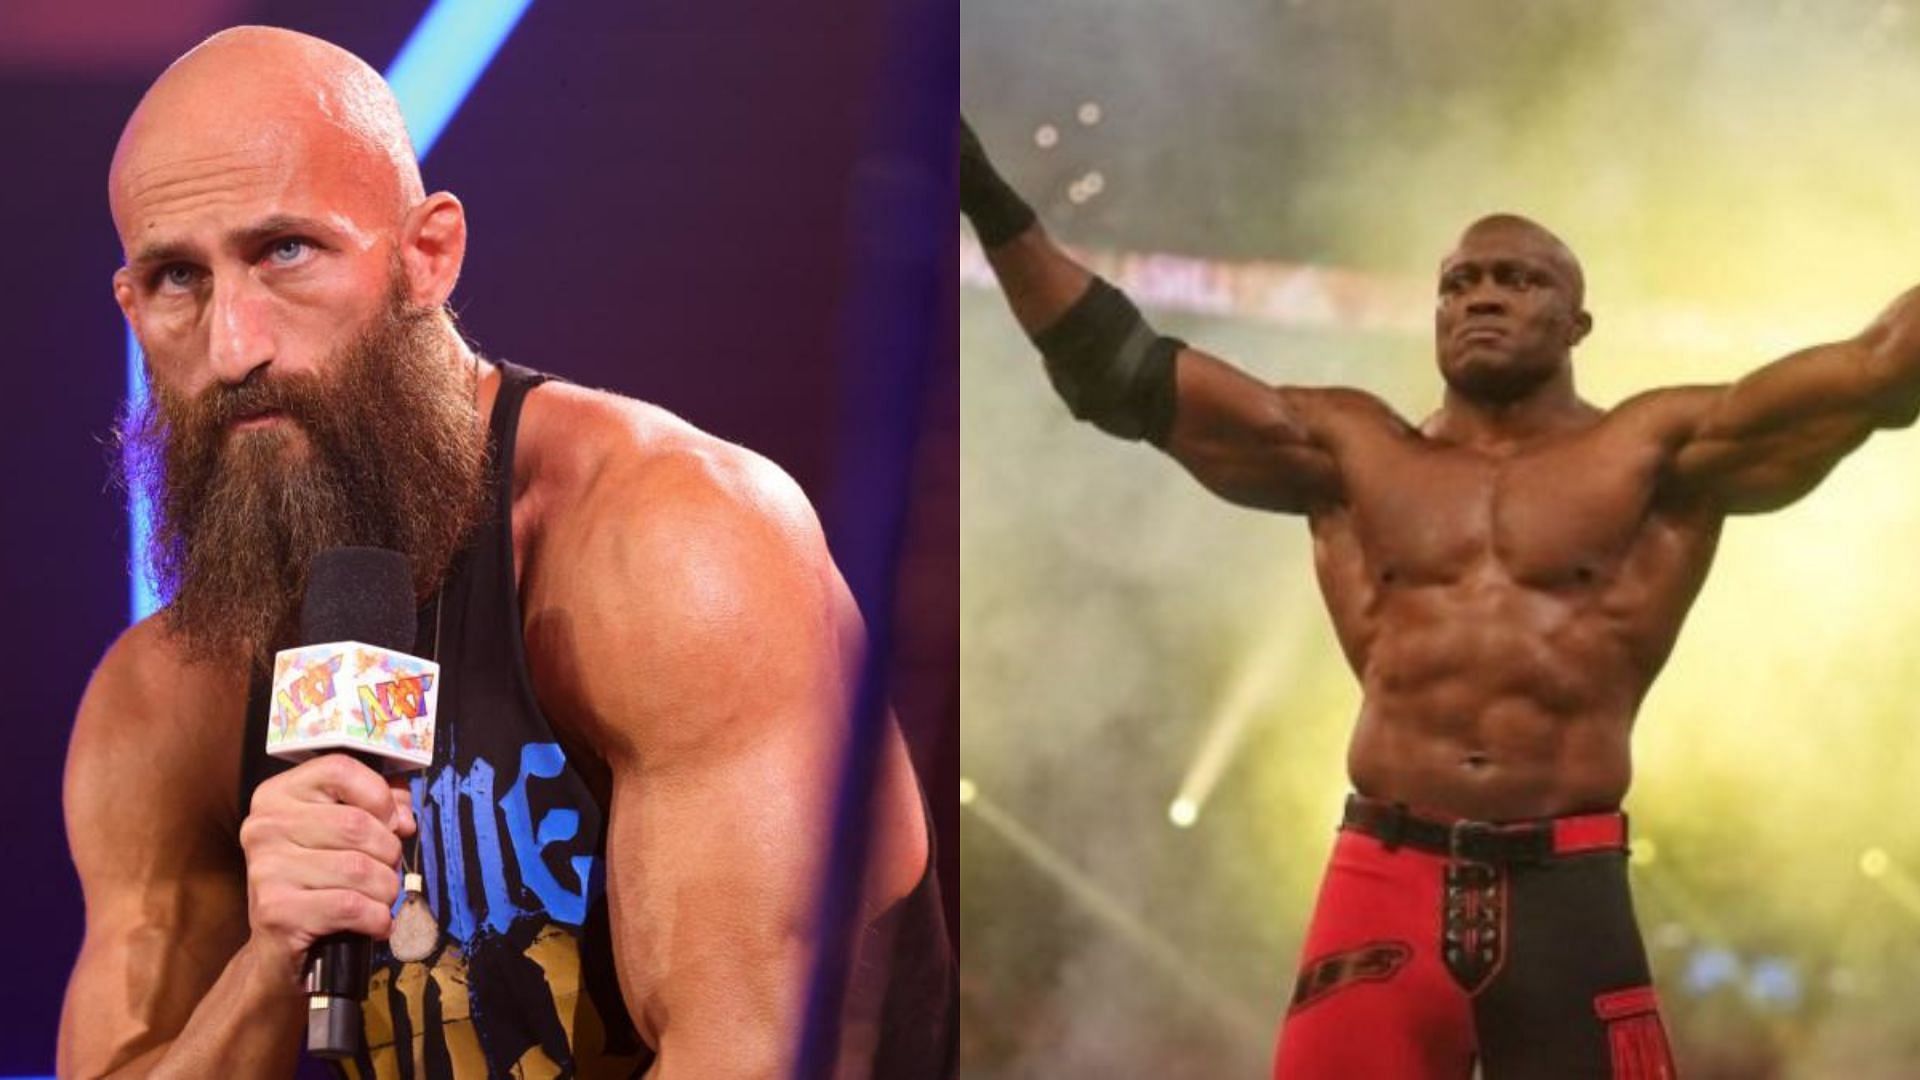 Ciampa faces Bobby Lashley for the US Championship next week